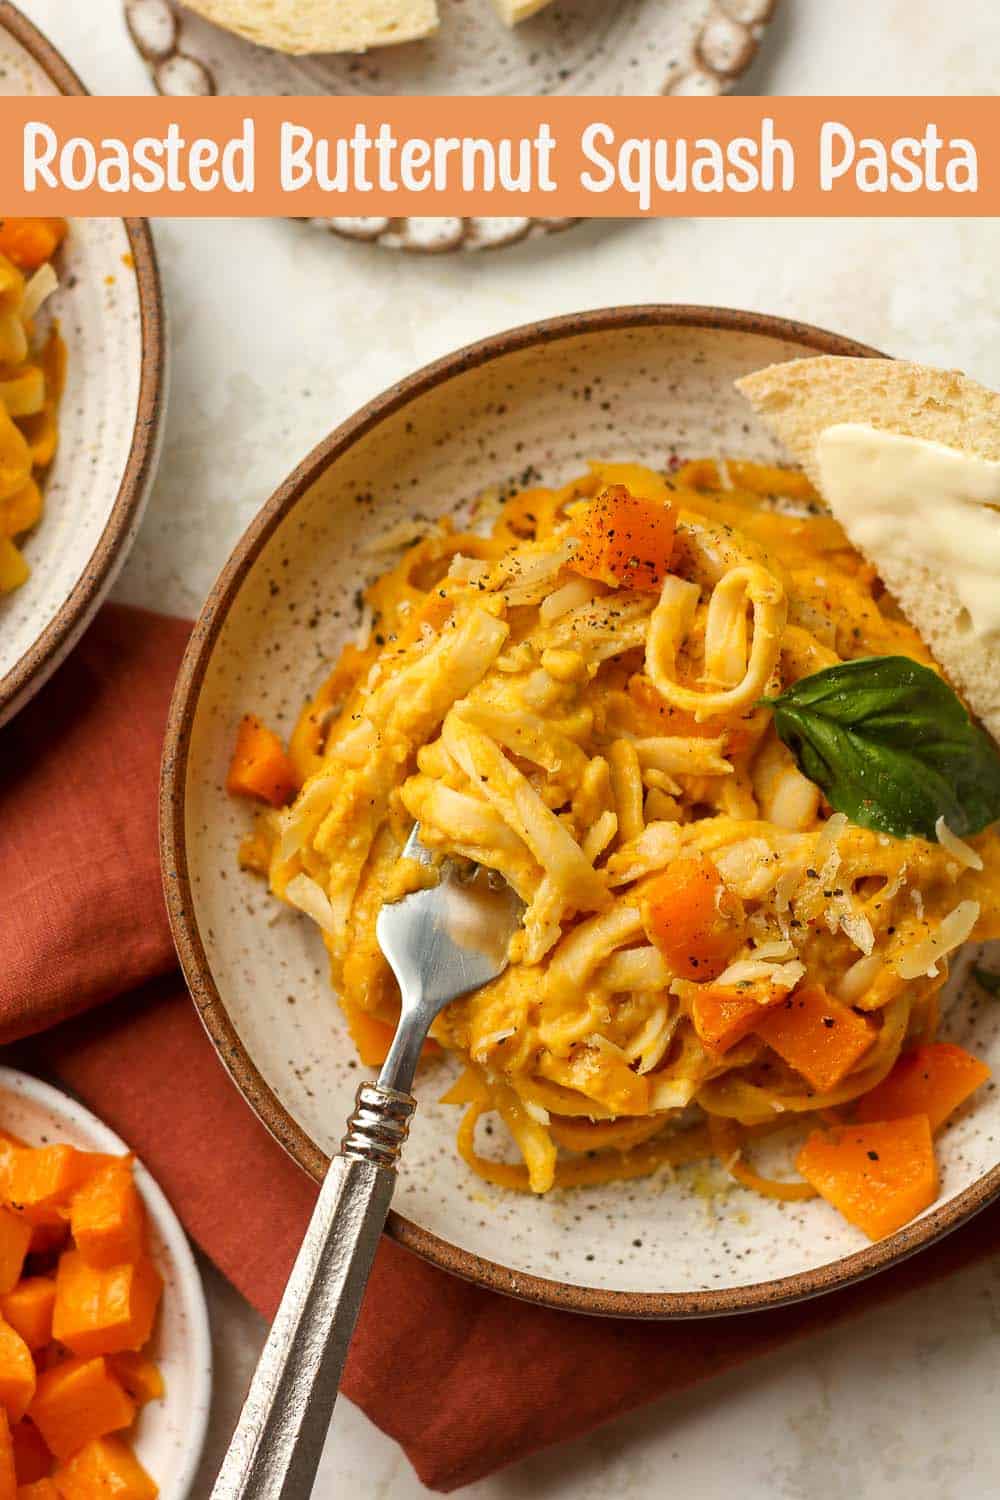 A bowl of creamy pasta with butternut squash and a fork.